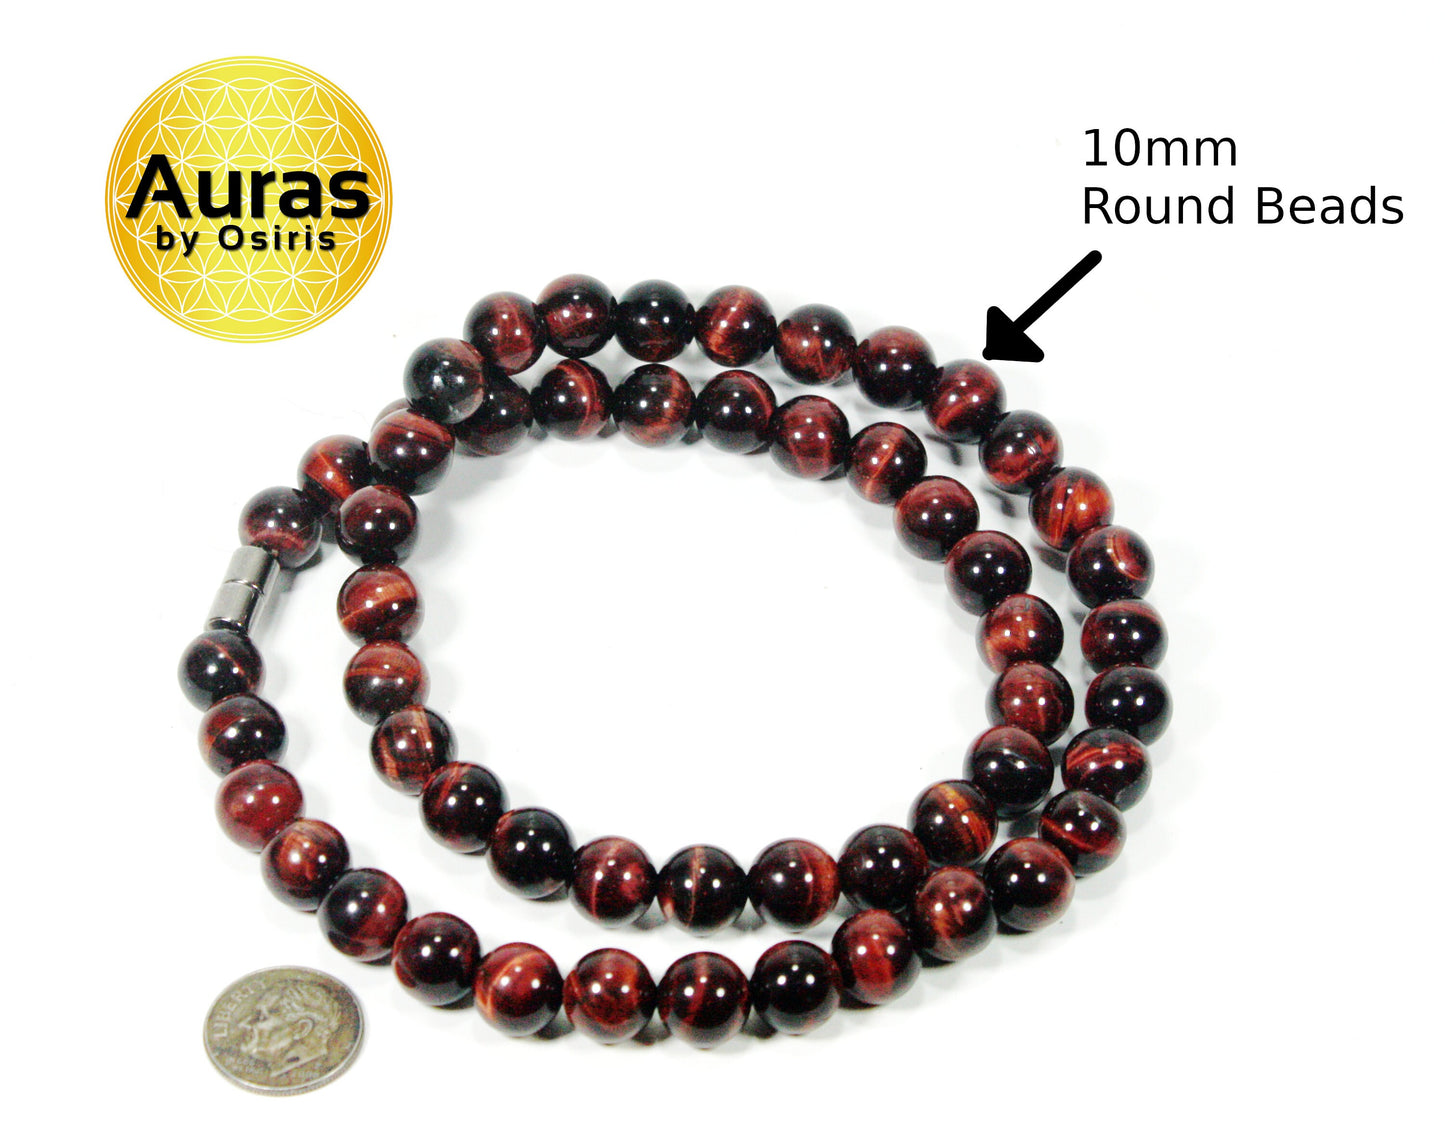 Red Tiger Eye Necklace - Mens Necklace - African jewelry - African Necklace - Tribal Necklace